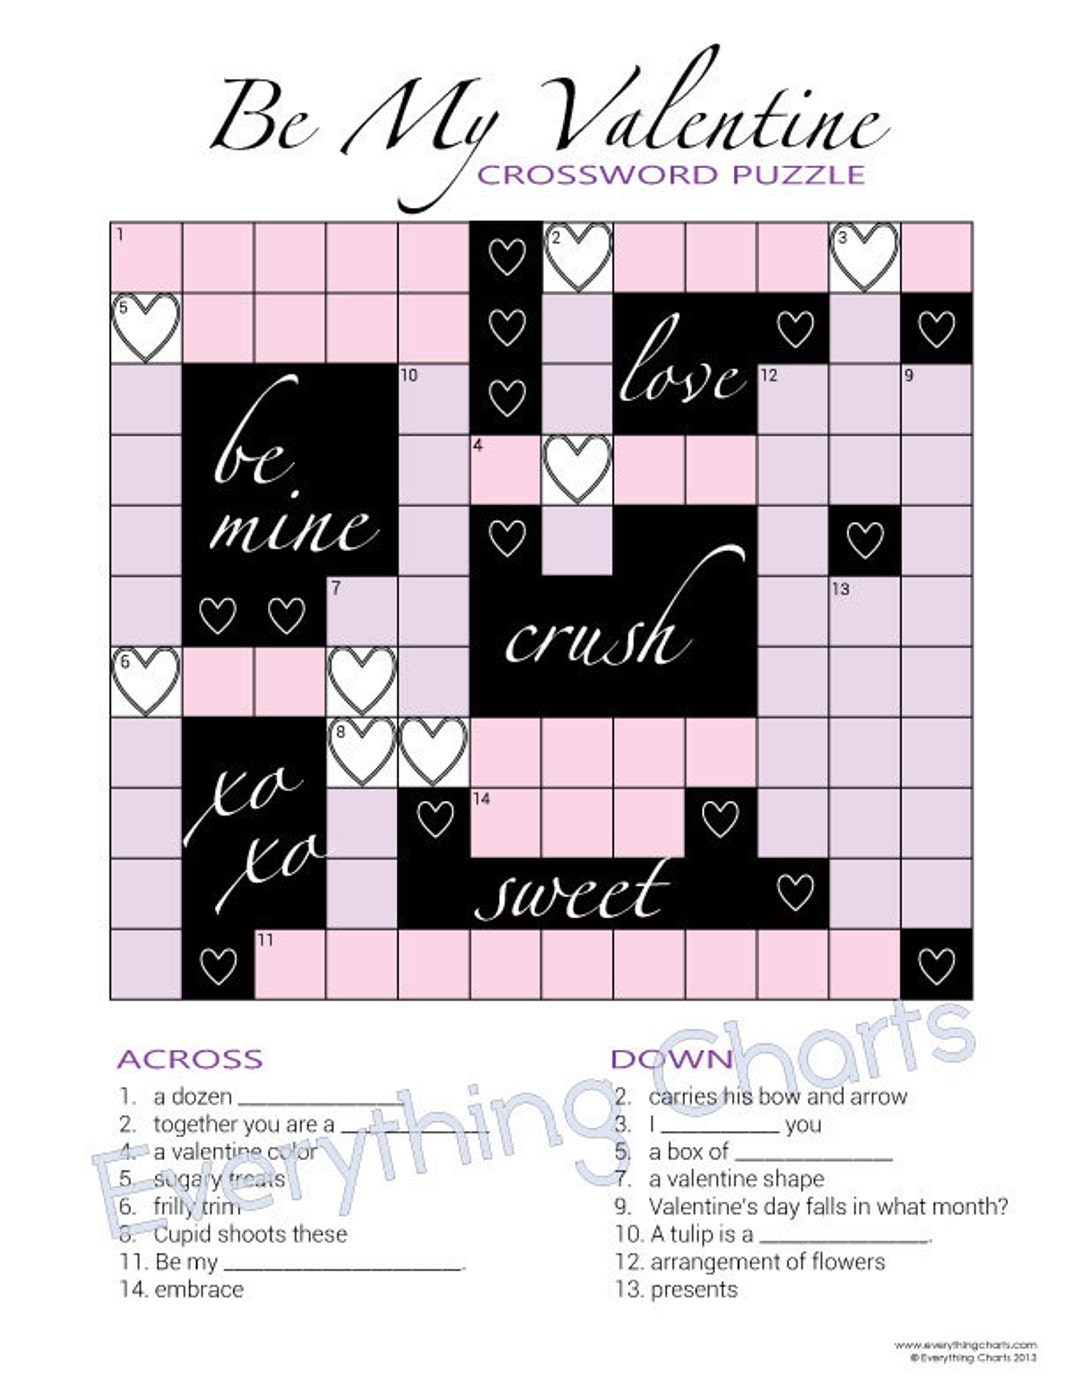 who wrote essays in love crossword